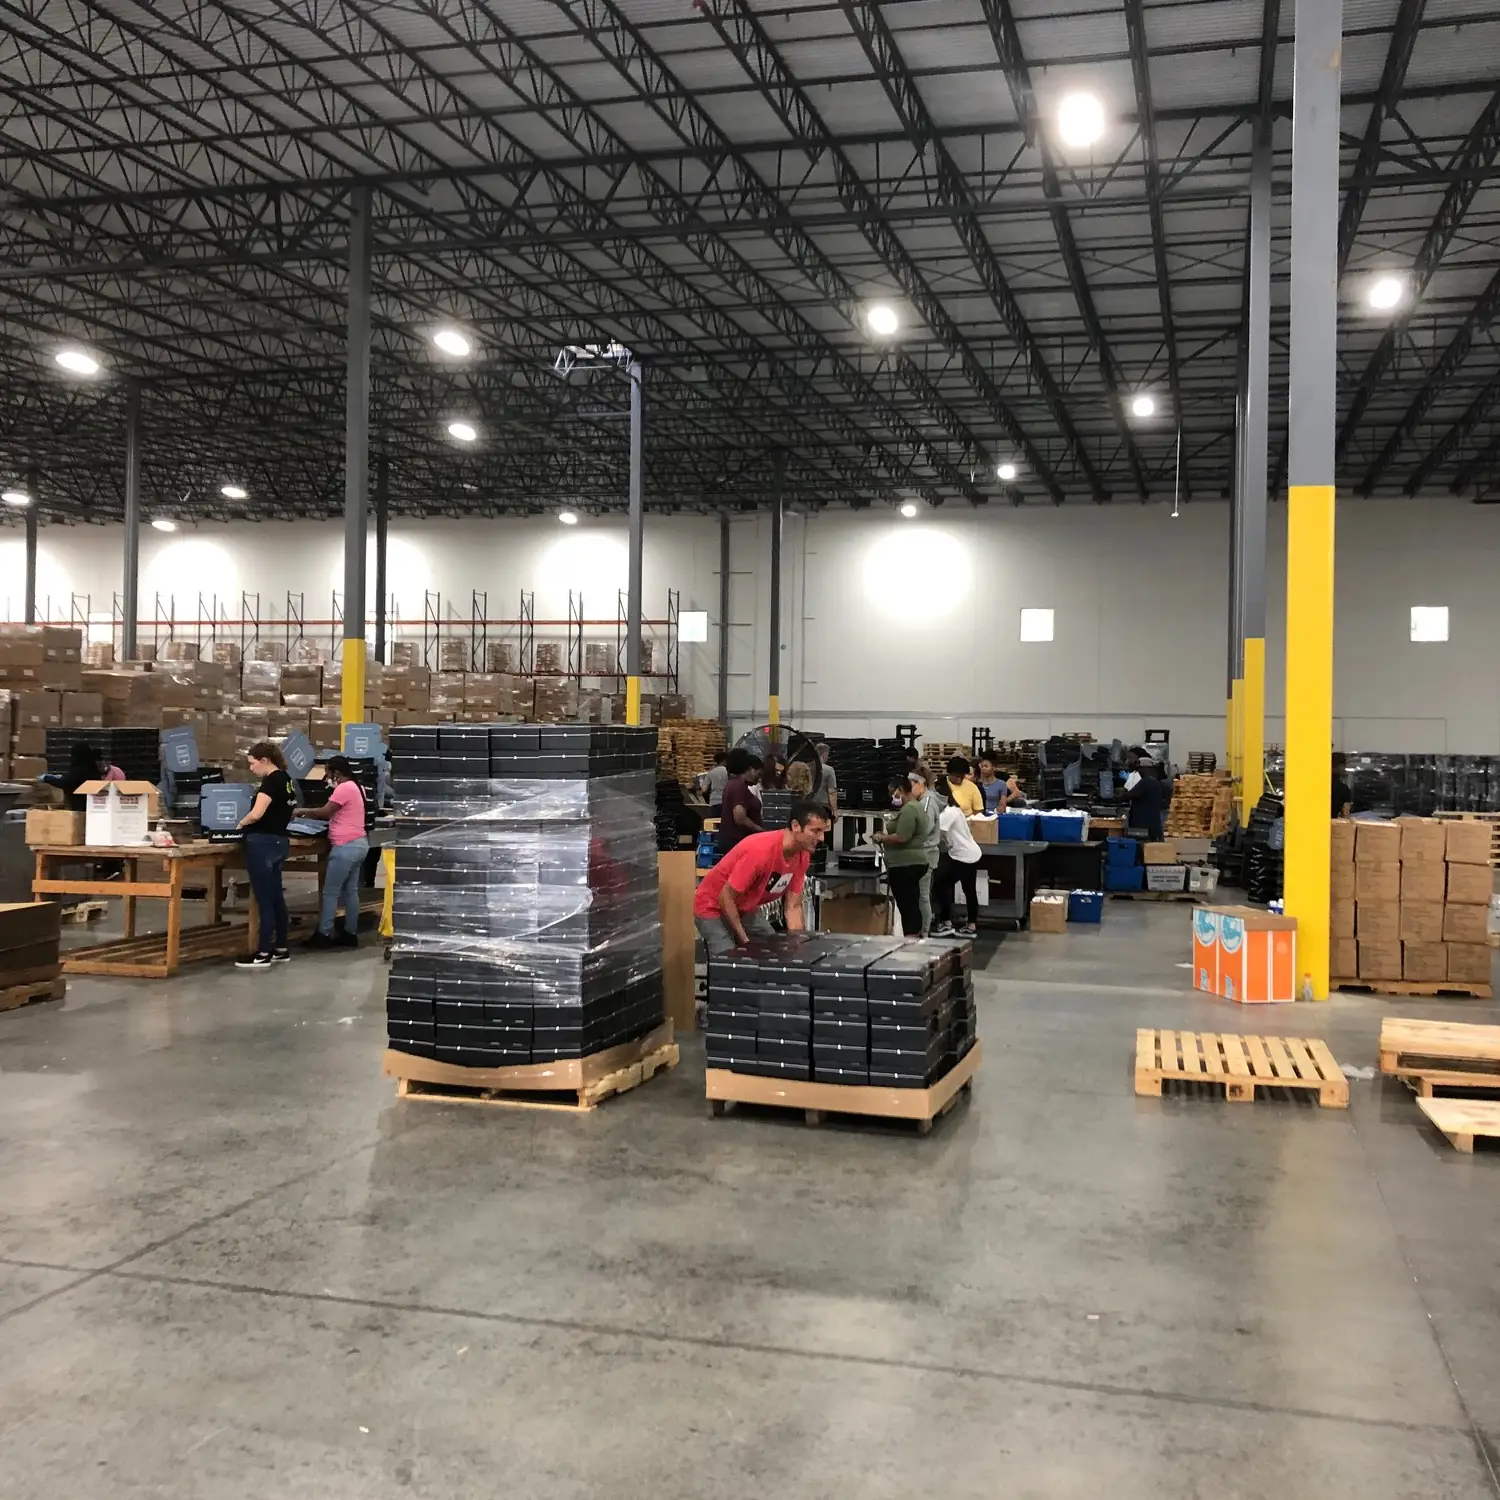 workers-revising-inventory-at-a-warehouse